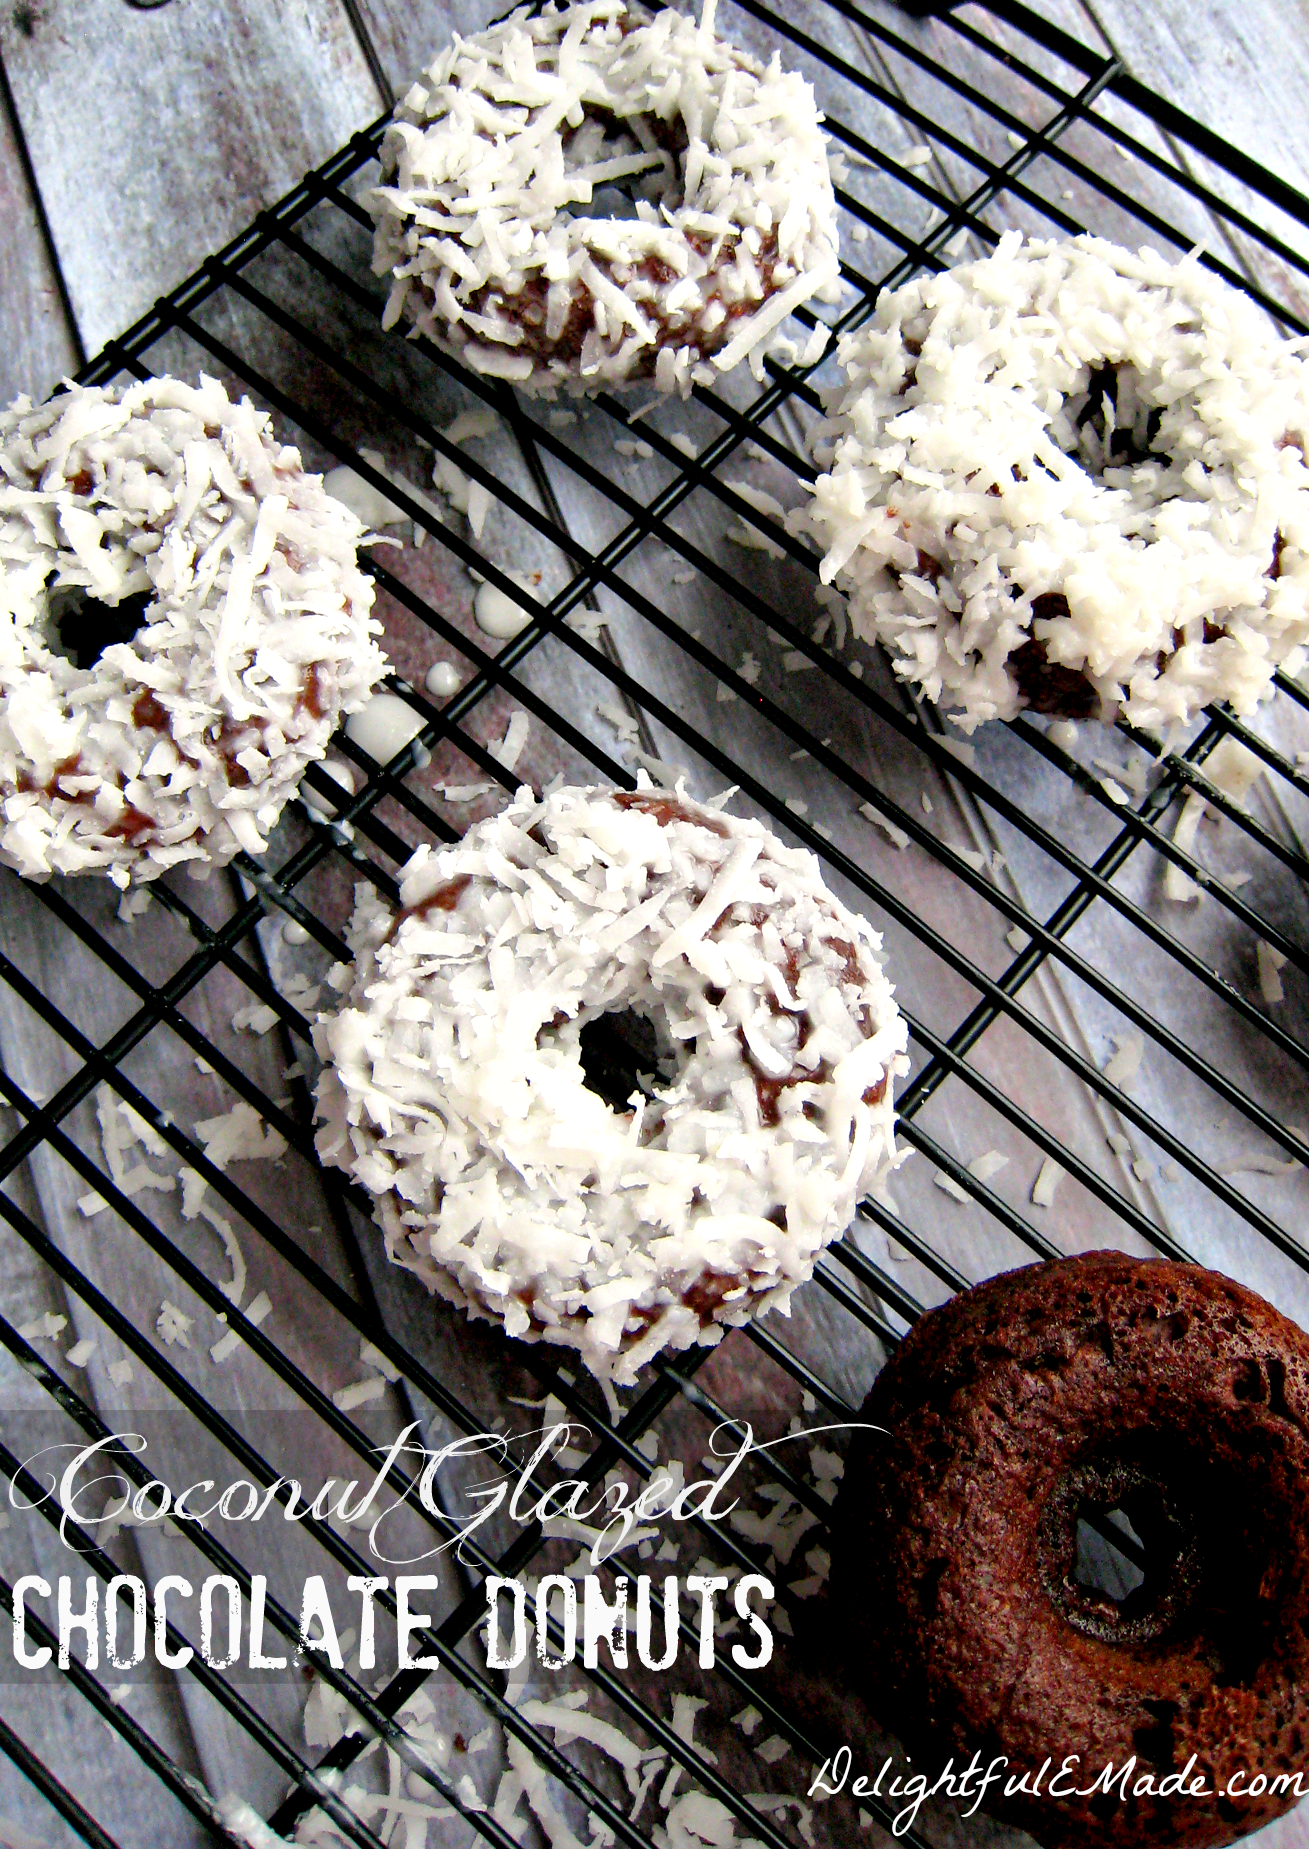 Coconut Glazed Chocolate Donuts by Delightful E Made